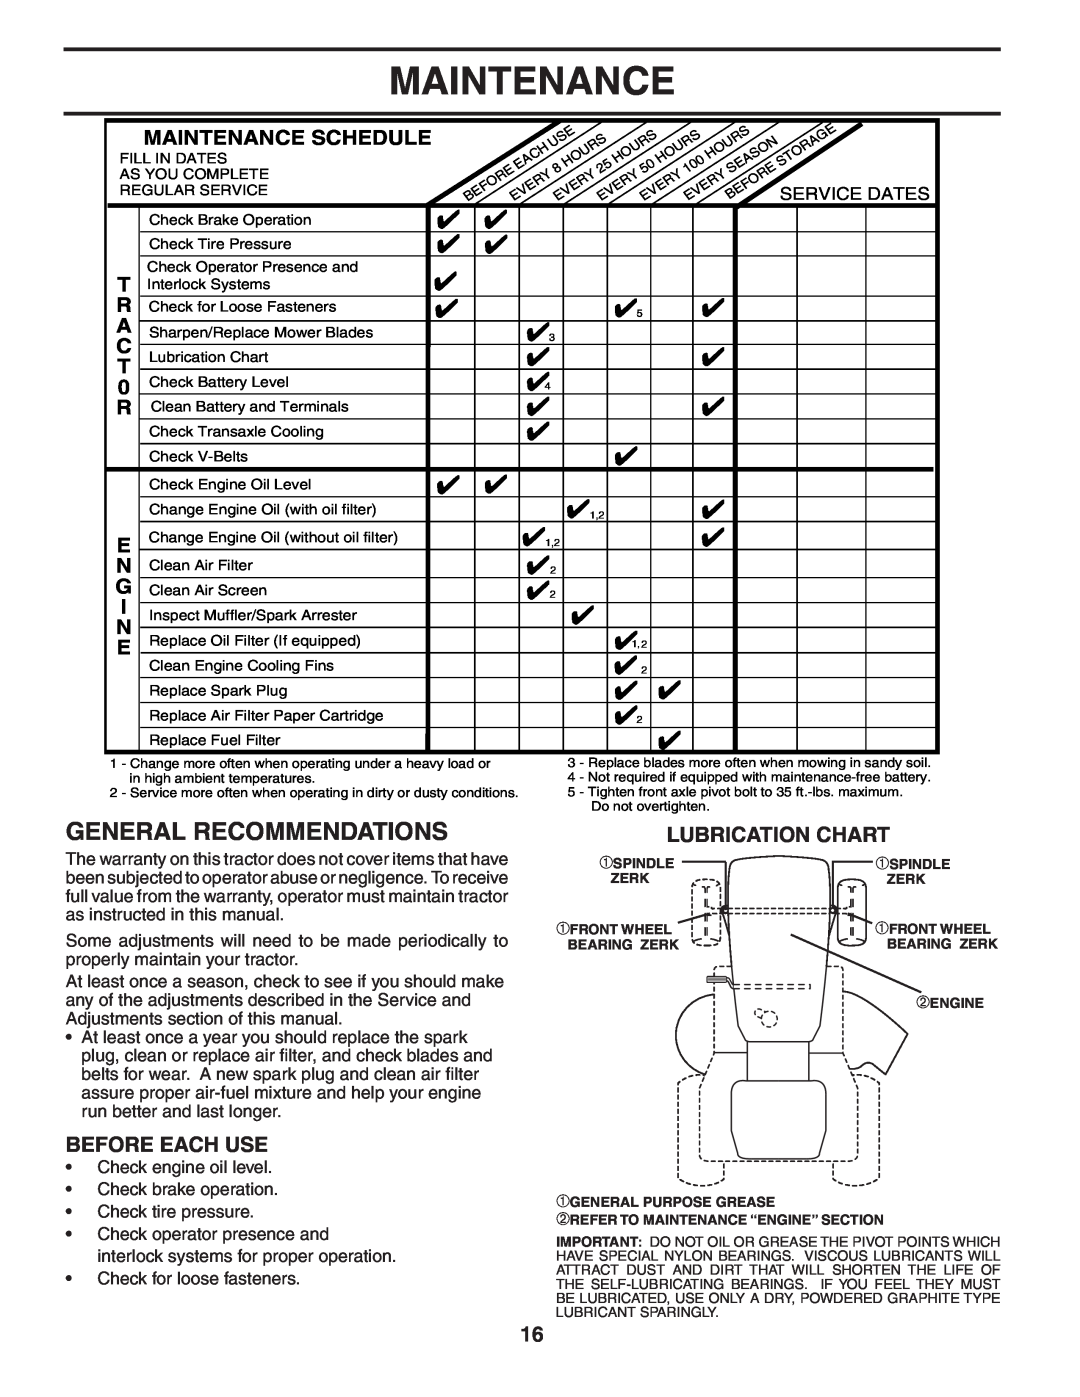 Poulan PD22H42STC owner manual Maintenance, General Recommendations, Lubrication Chart, Before Each Use 